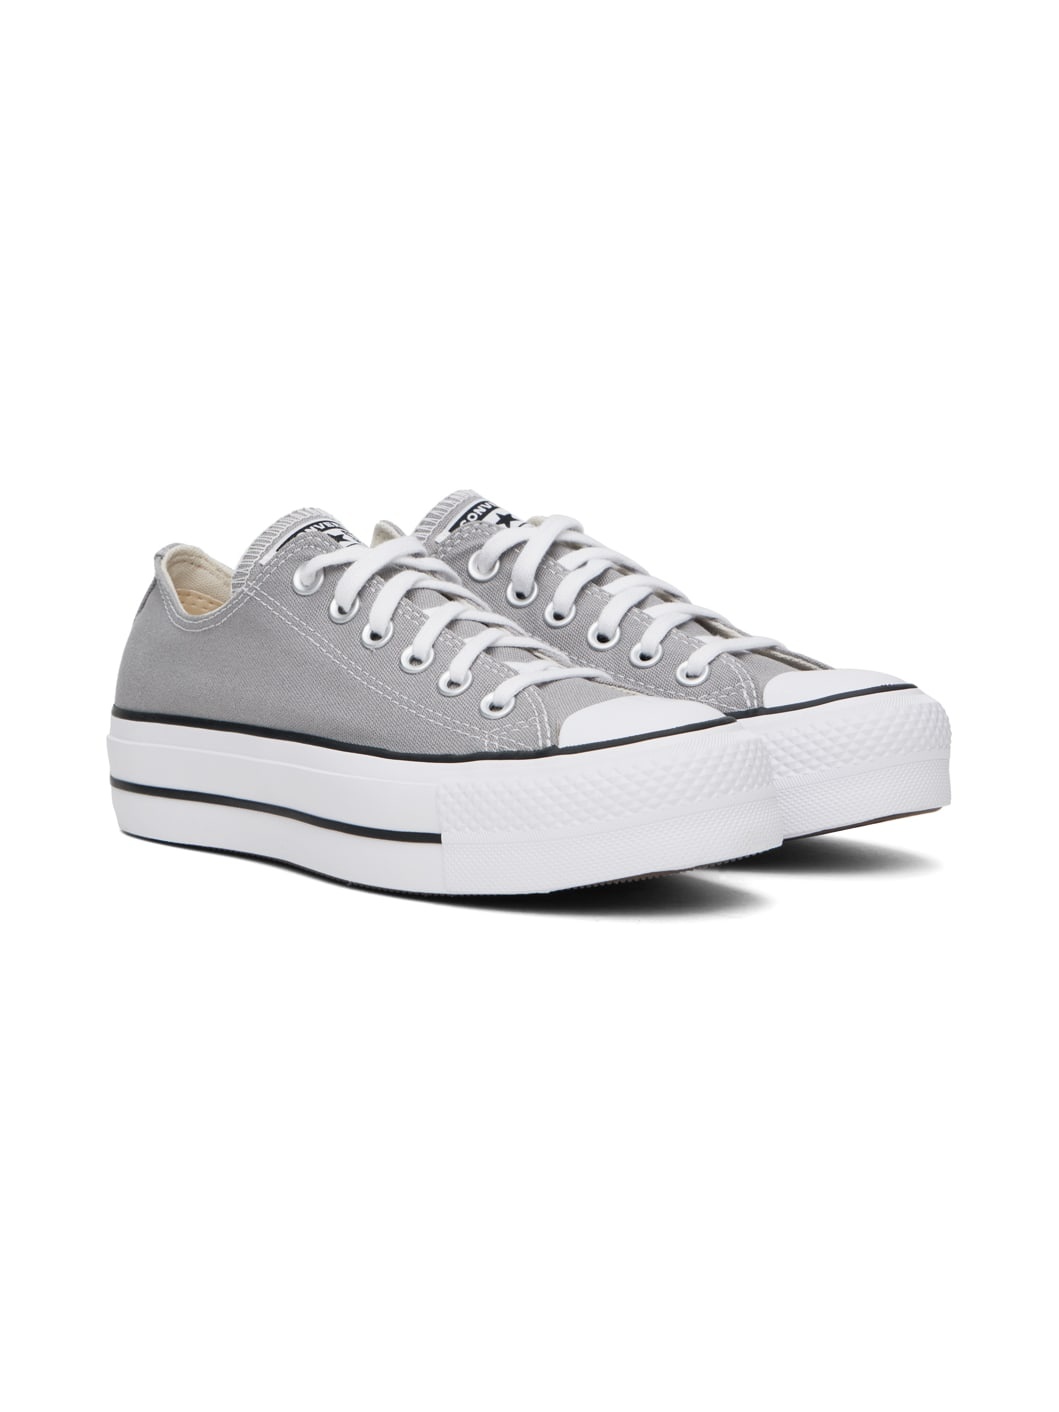 Gray Chuck Taylor All Star Low Top Sneakers - 4